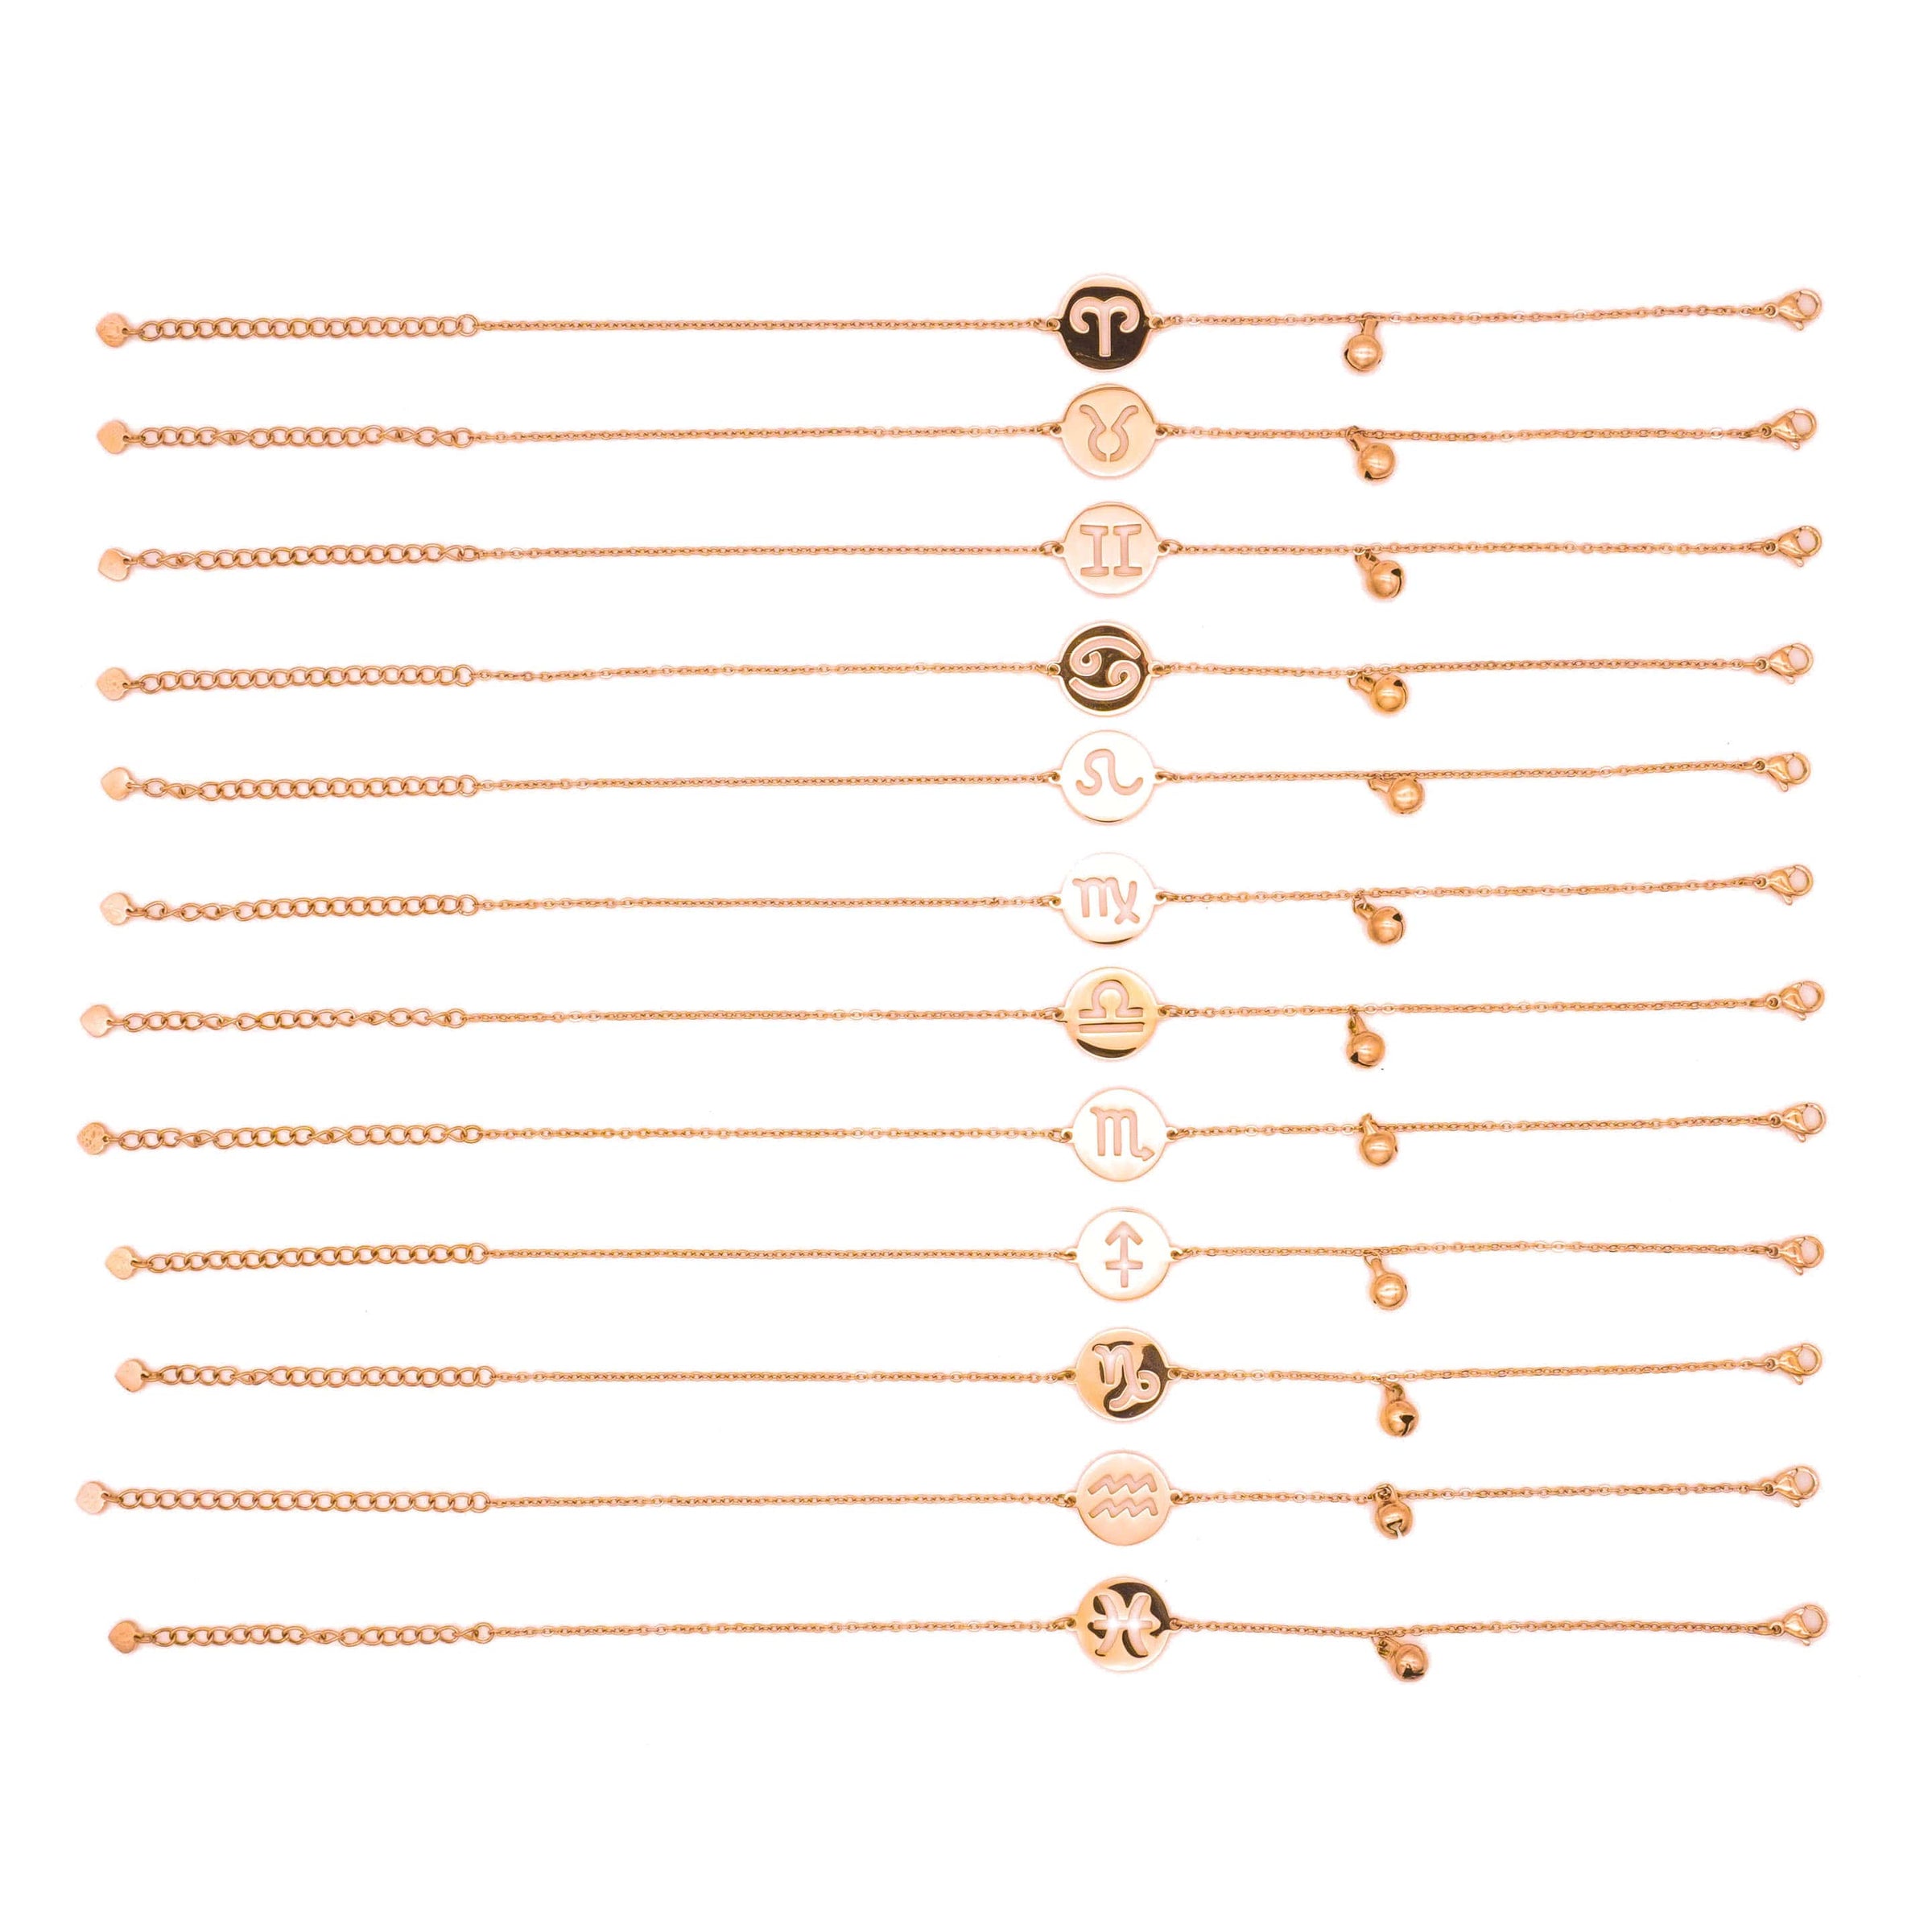 Starborn Patterns Rose Gold Plated Stainless Steel Zodiac Sign Astrology Ankle Bracelet Anklets with Aries Taurus Gemini Cancer Leo Virgo Libra Scorpio Sagittarius Capricorn Aquarius Pisces Charms and Bell Pendant